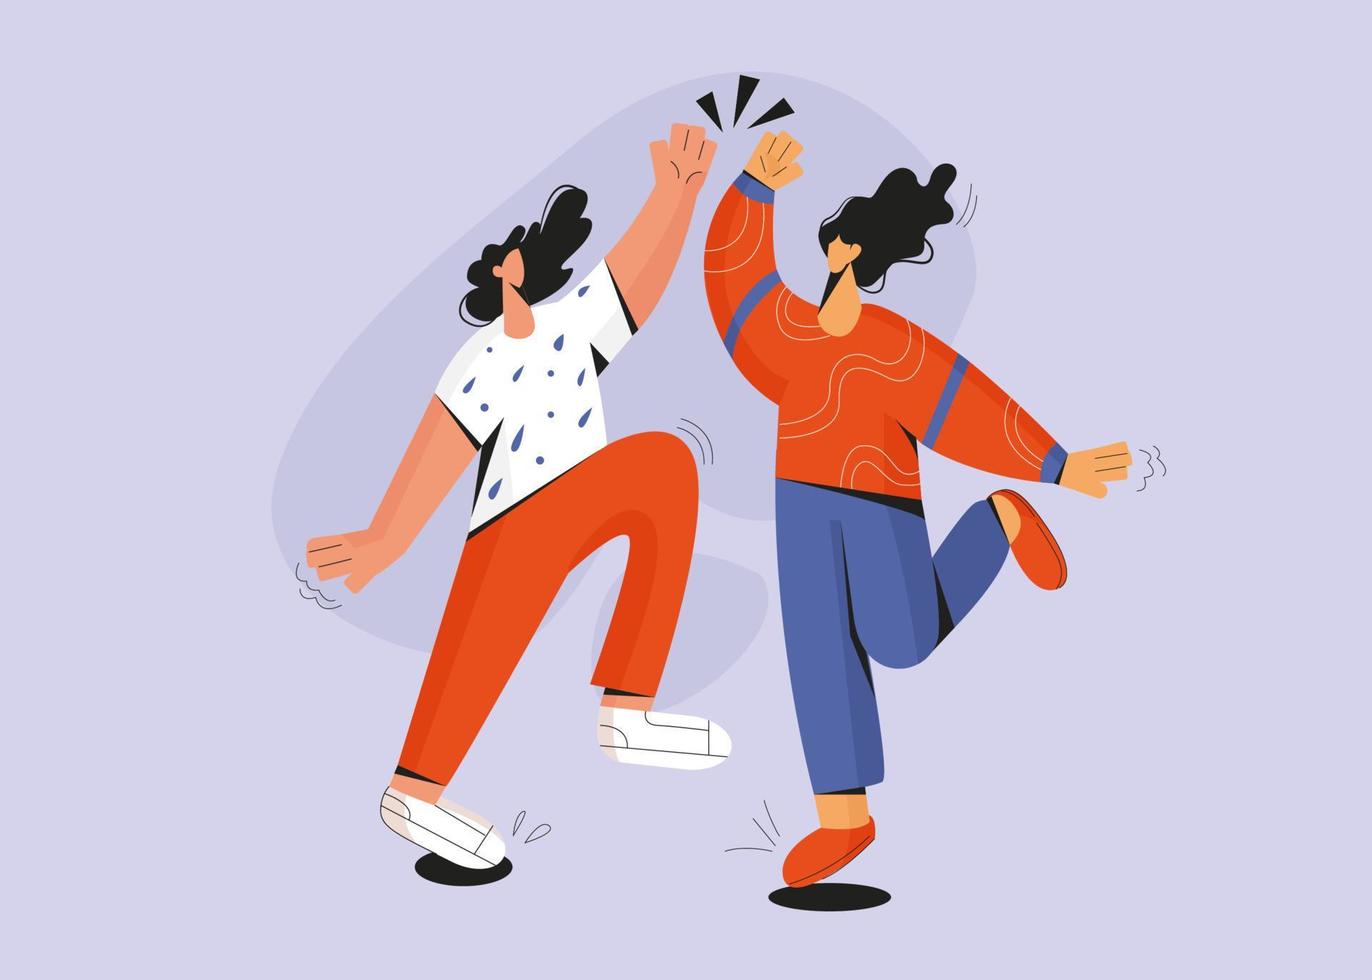 Excited people give high five celebrate shared business victory or win. Overjoyed happy women involved in teambuilding activity. Teamwork, success, goal achievement. Flat vector illustration.